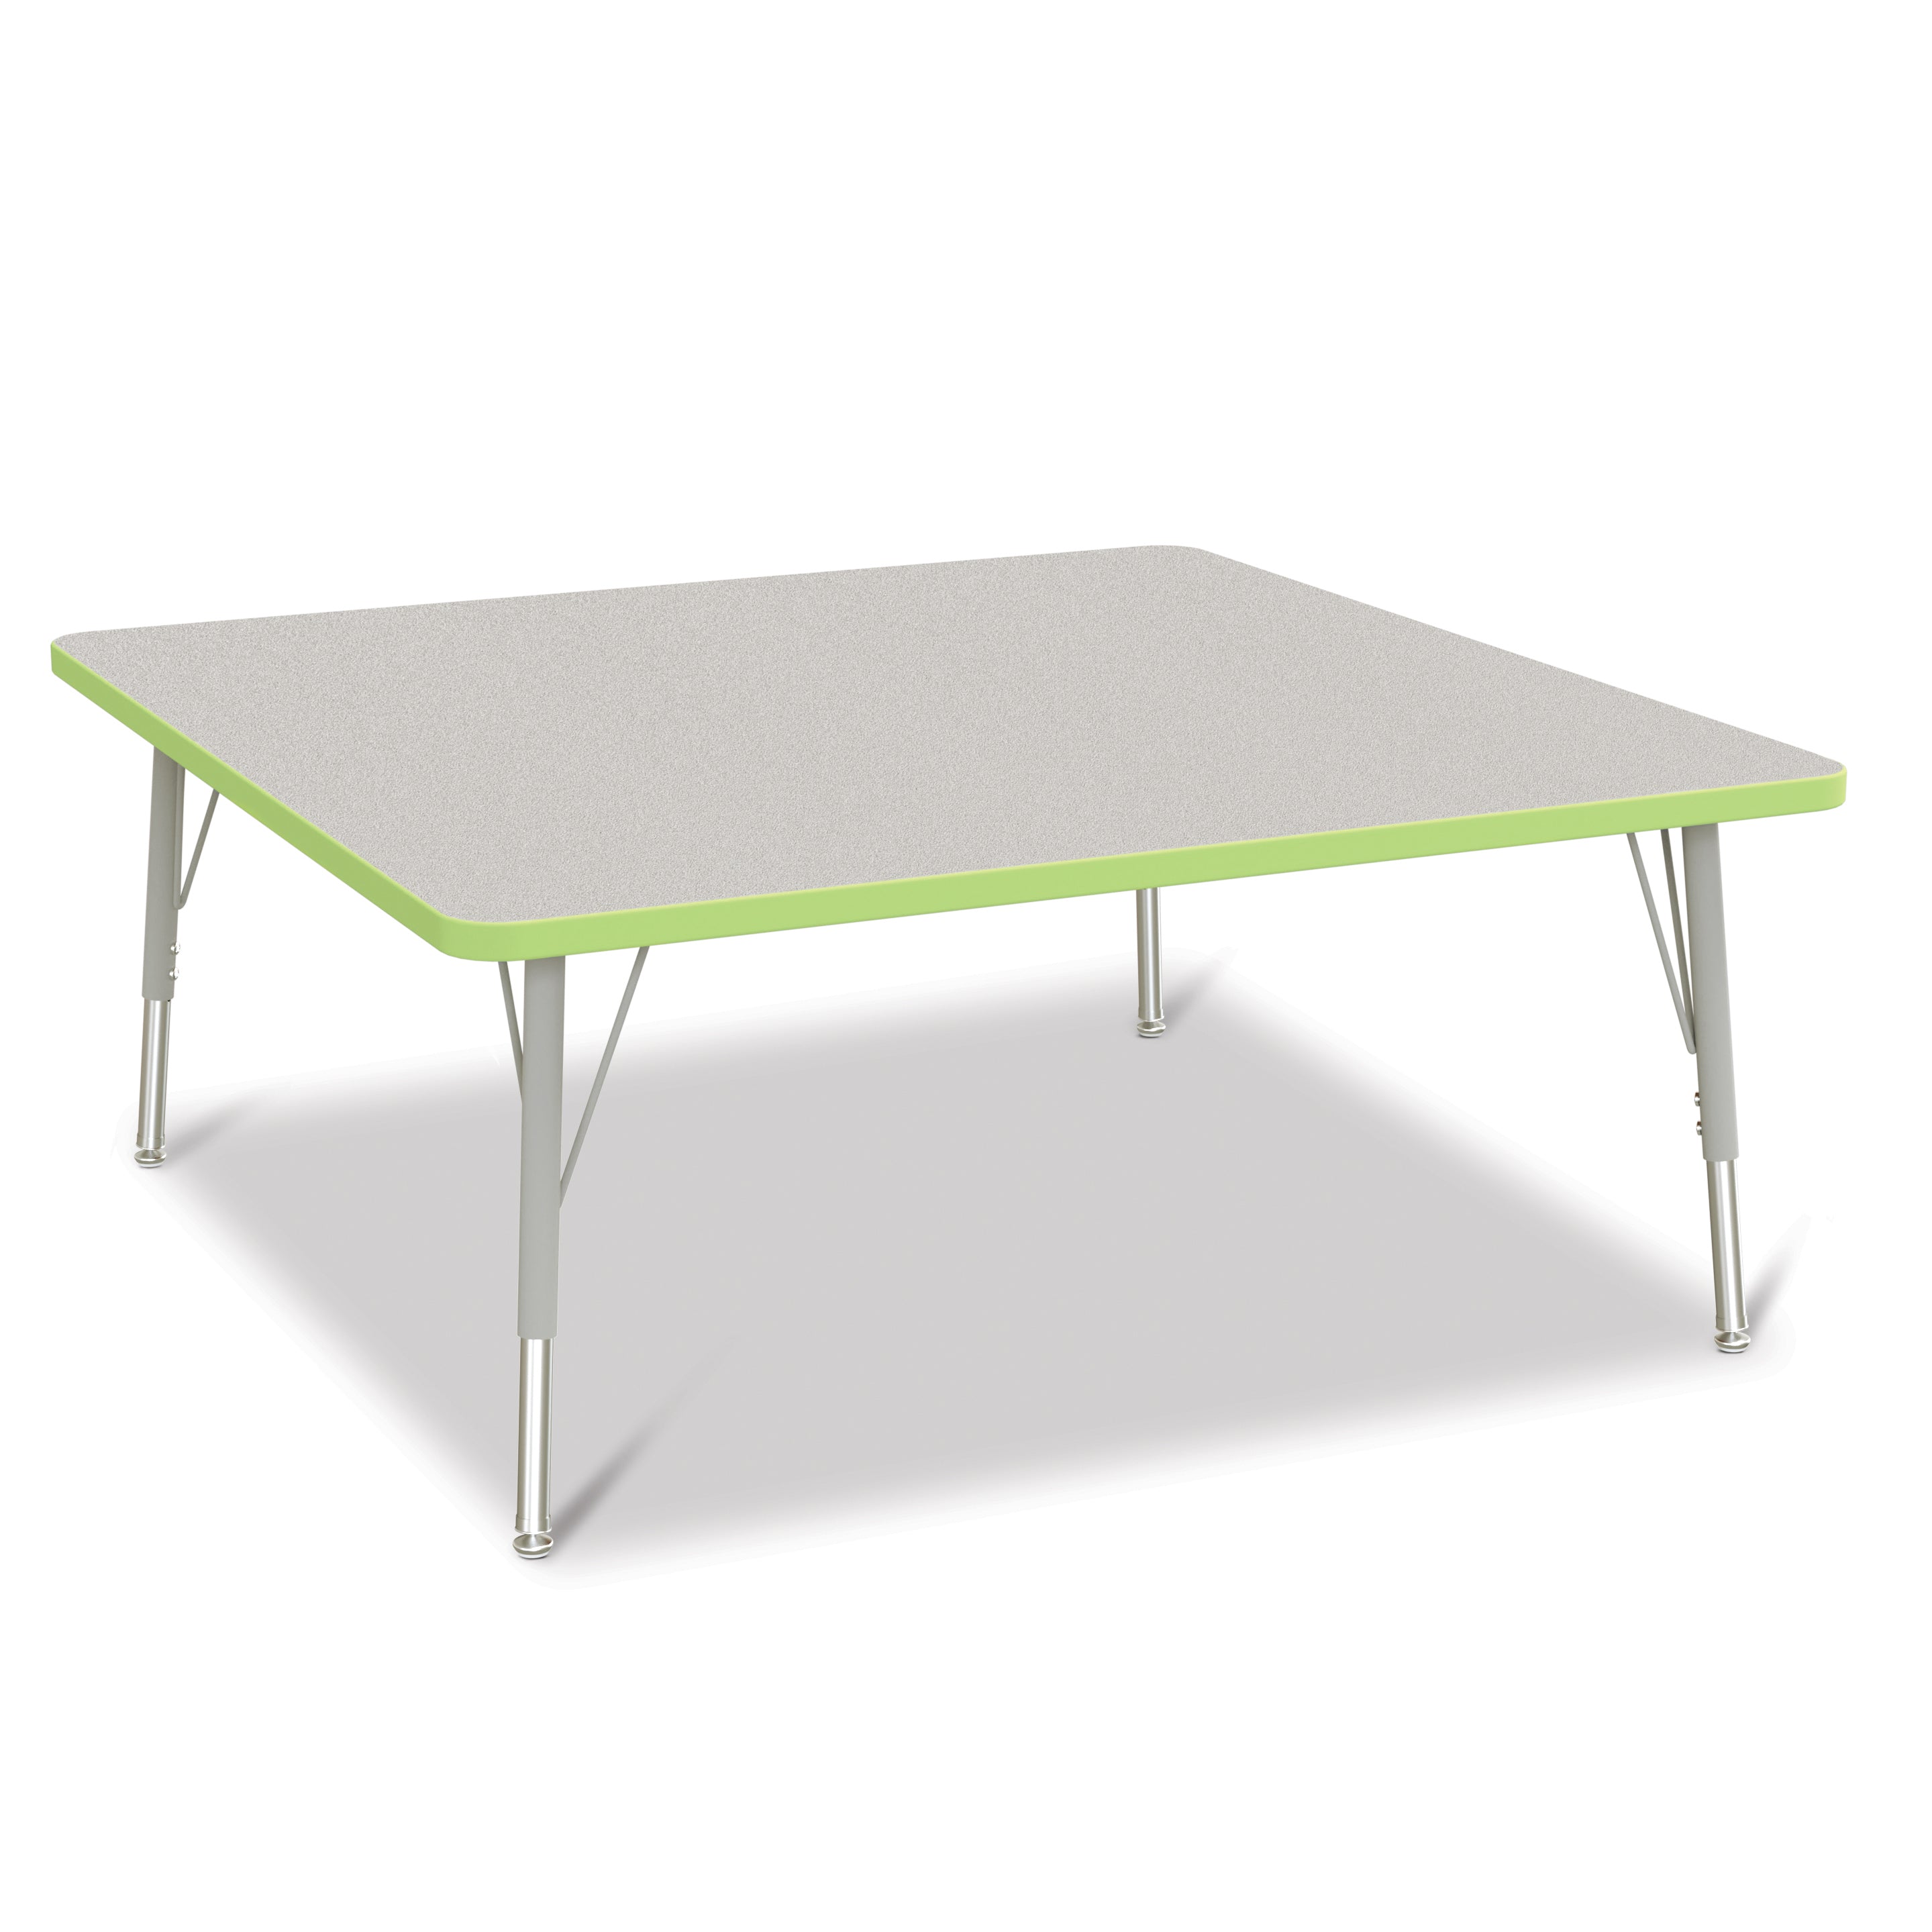 6418JCE130, Berries Square Activity Table - 48" X 48", E-height - Freckled Gray/Key Lime/Gray